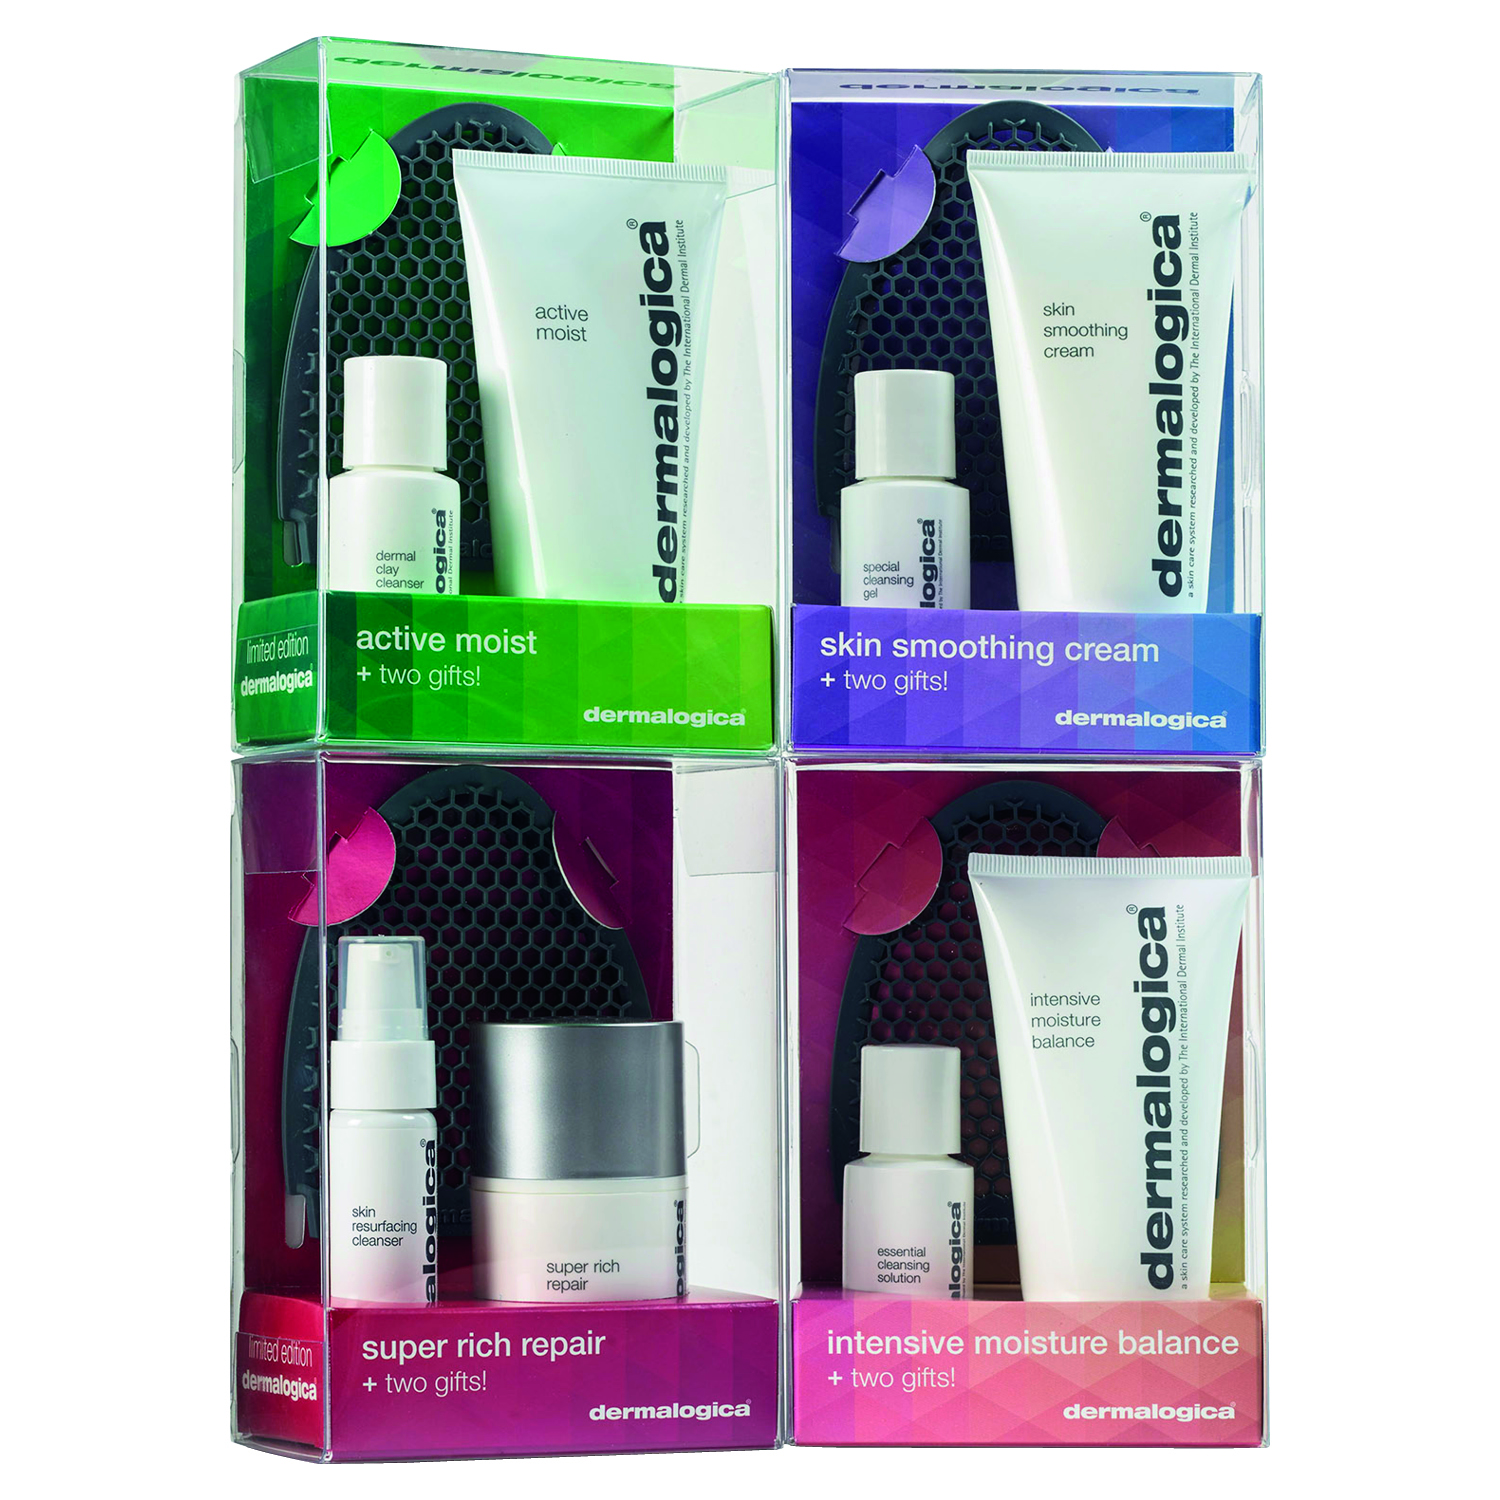 The Perfect Gift from Dermalogica